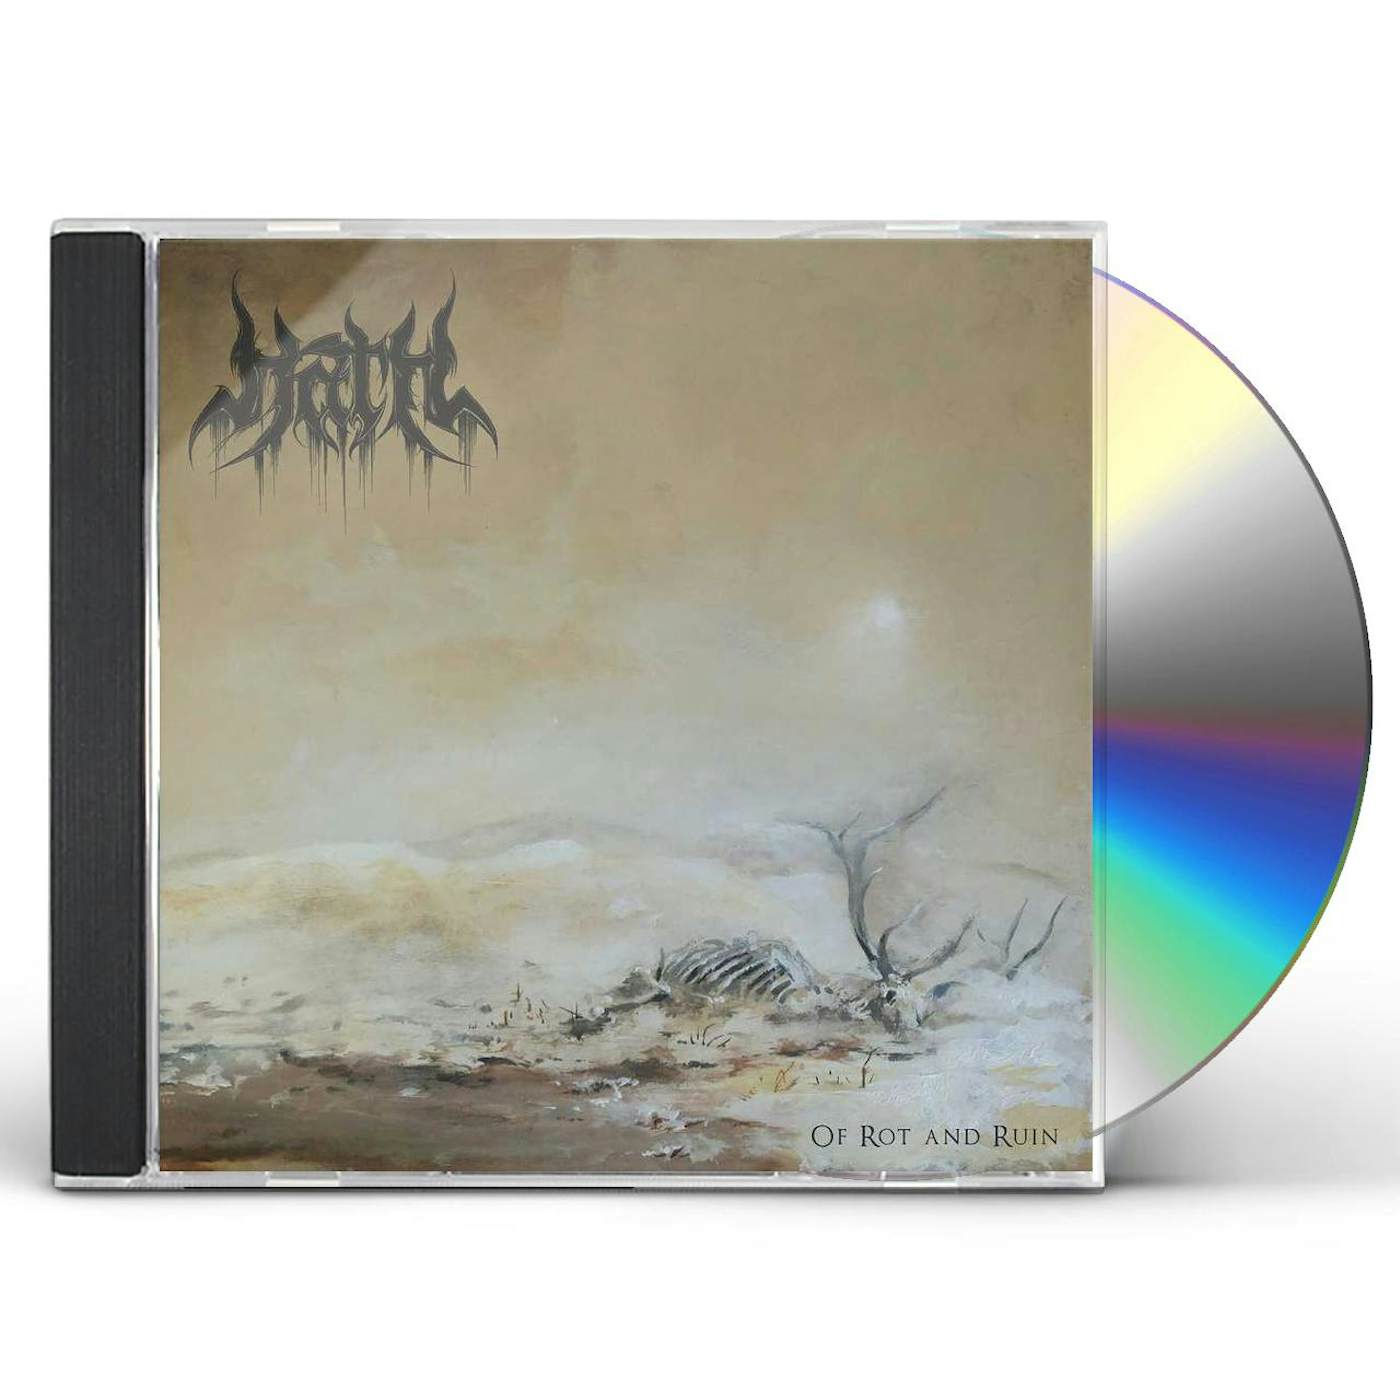 Hath OF ROT AND RUIN CD